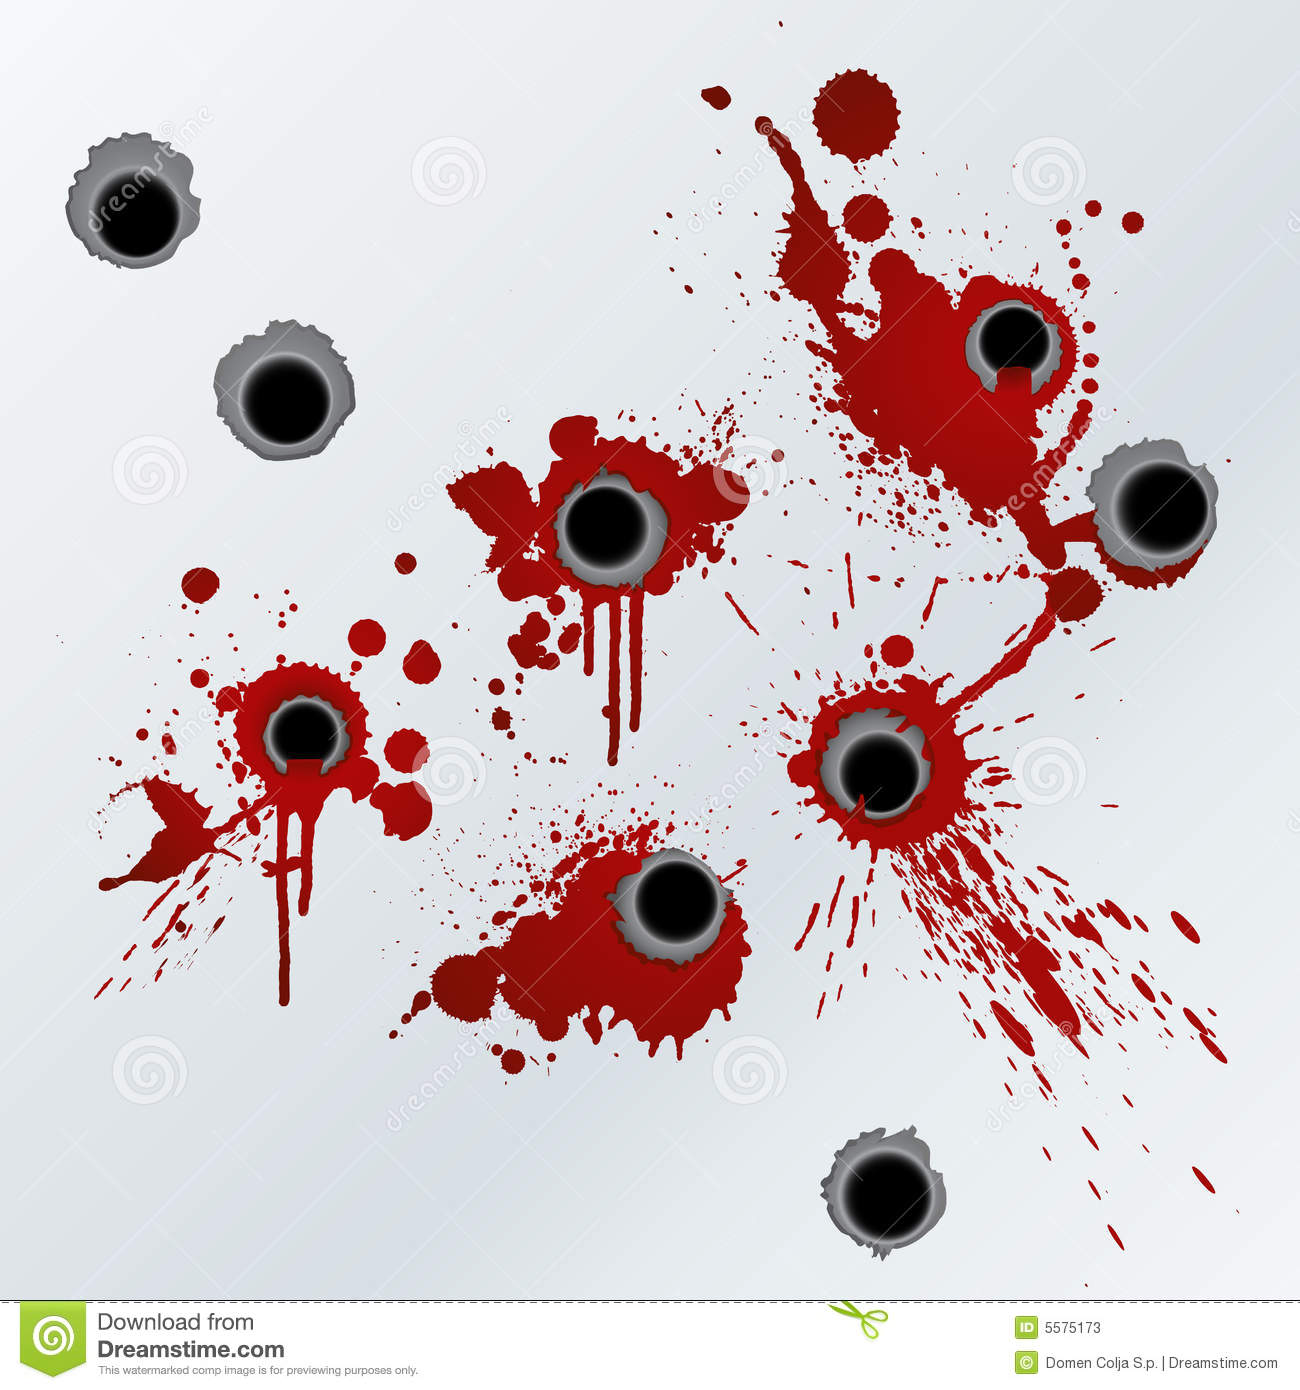 Illustration Of Bloody Gunshots With Blood Splatters On The Wall